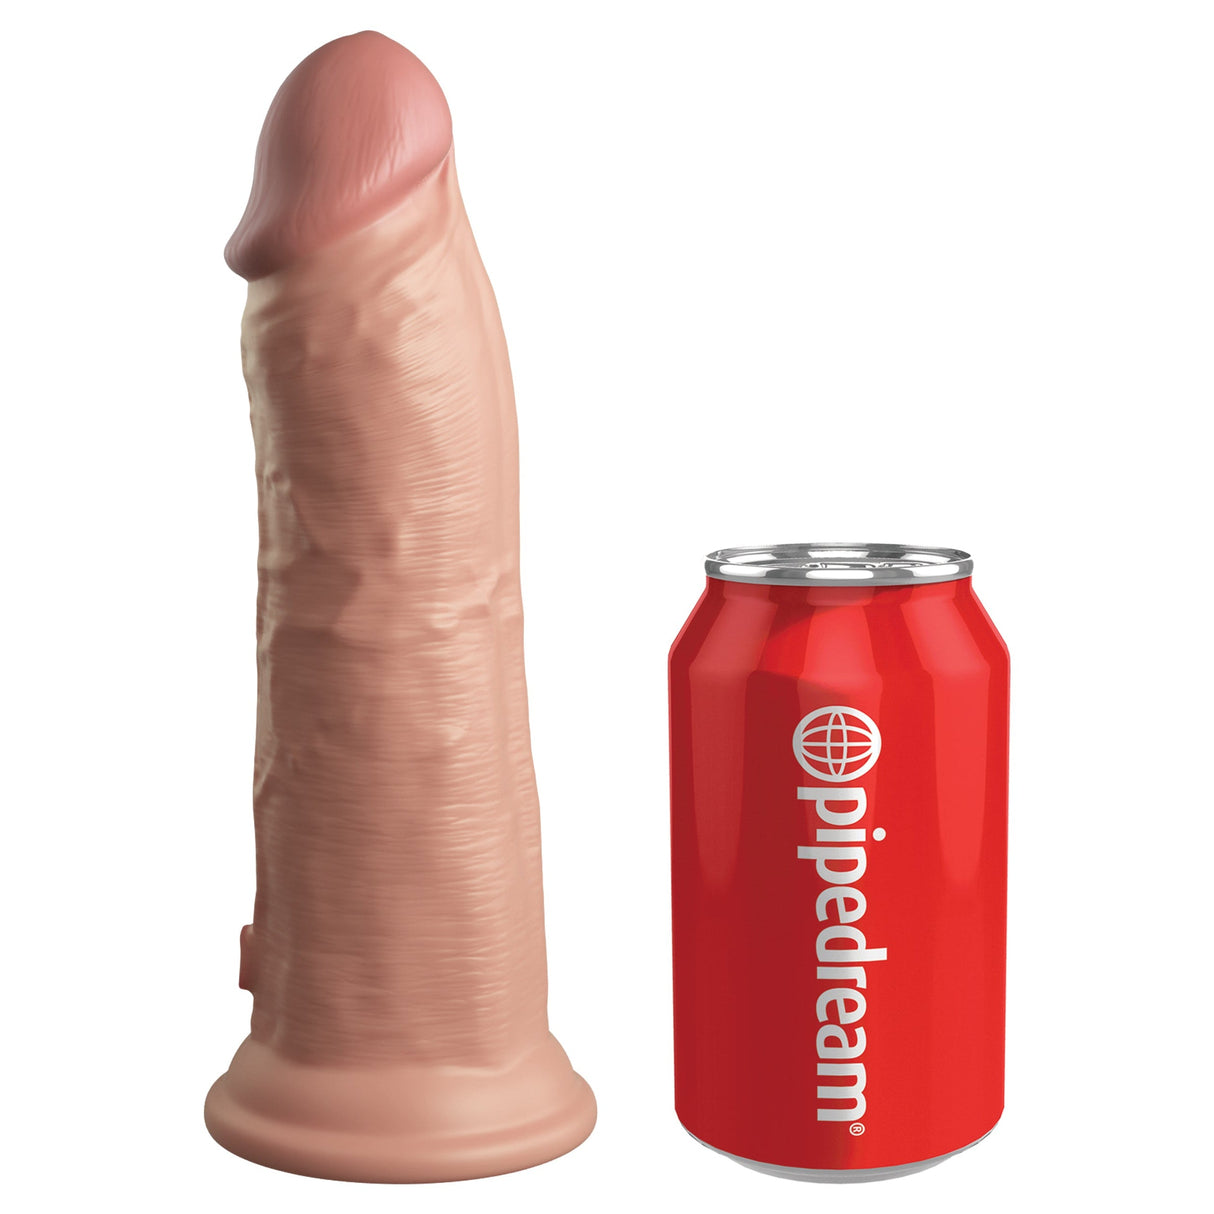 King Cock Deluxe Silicone Body Dock Kit